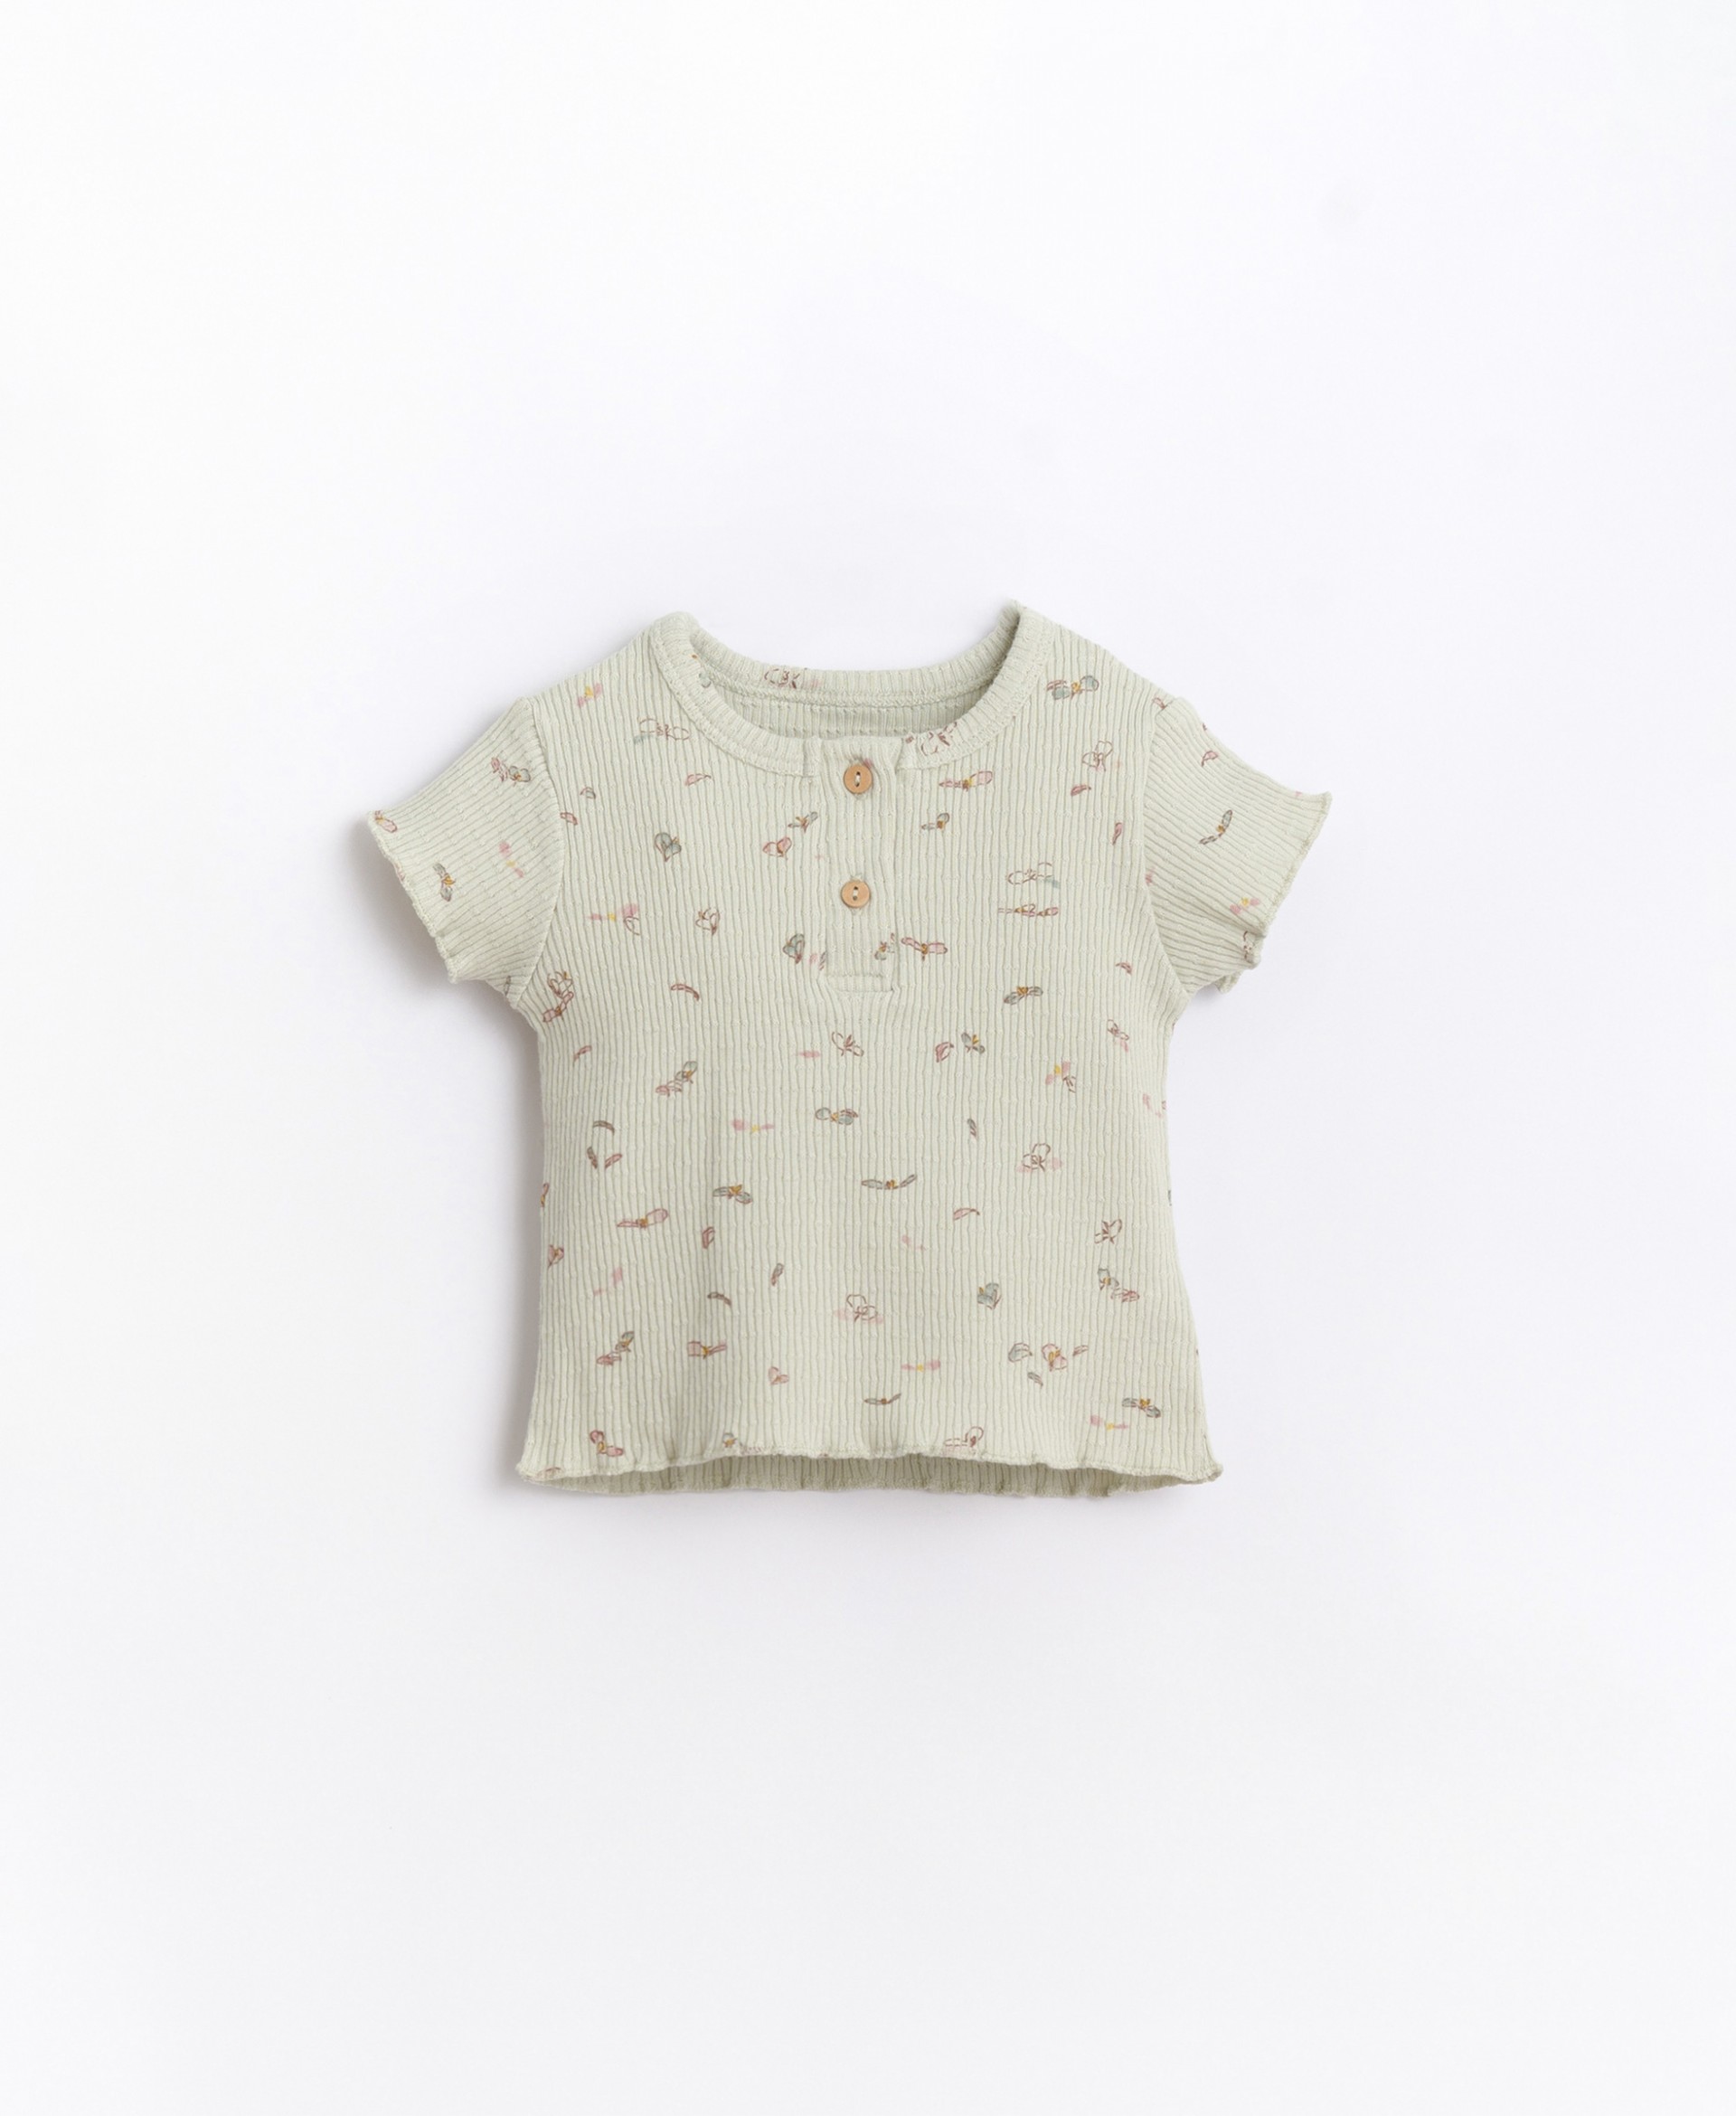 T-shirt in organic cotton with buttons | Basketry